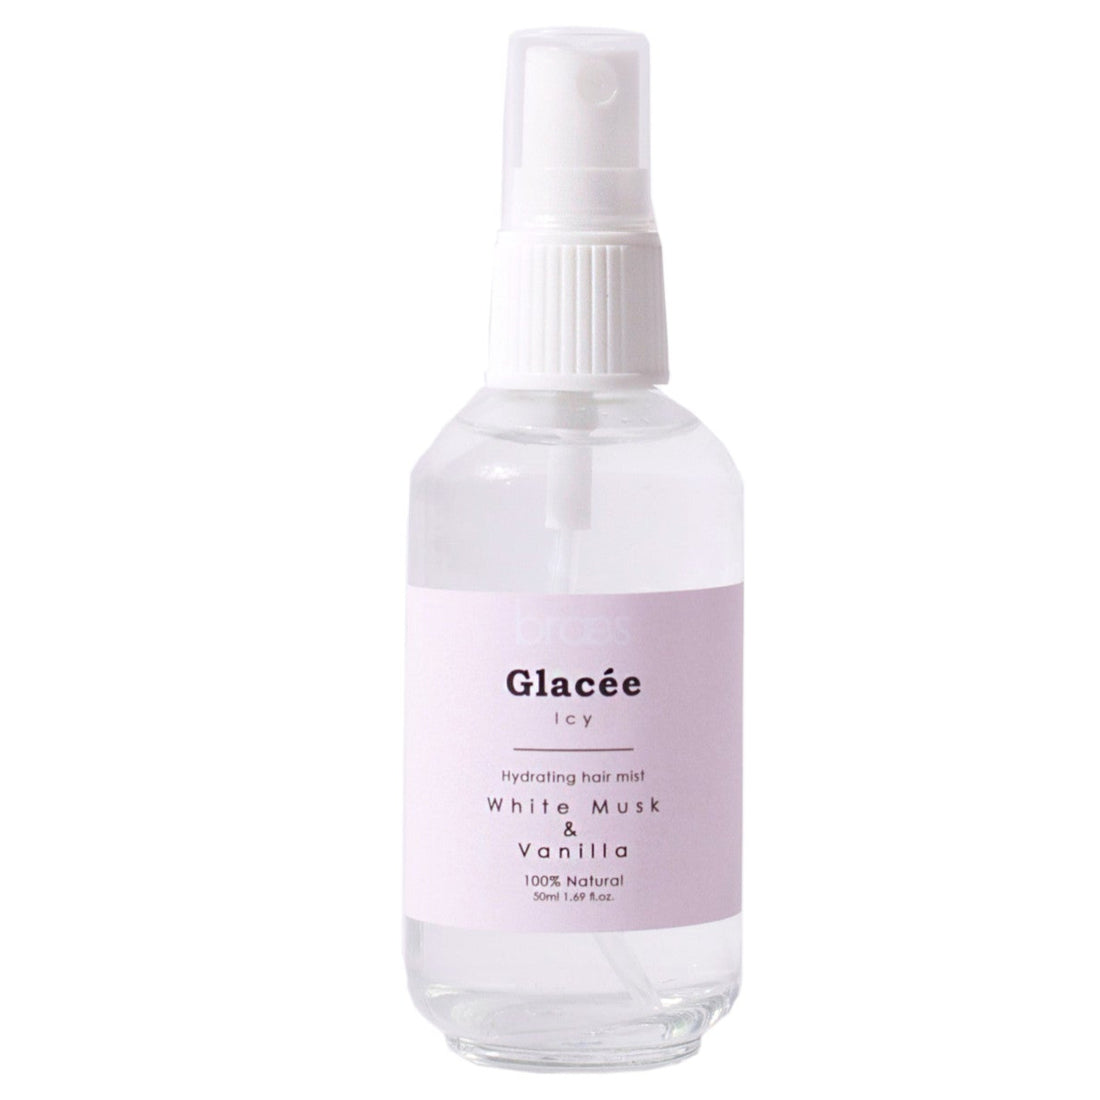 Braes Glacee, Icy – Hydrating Hair Mist 50ml